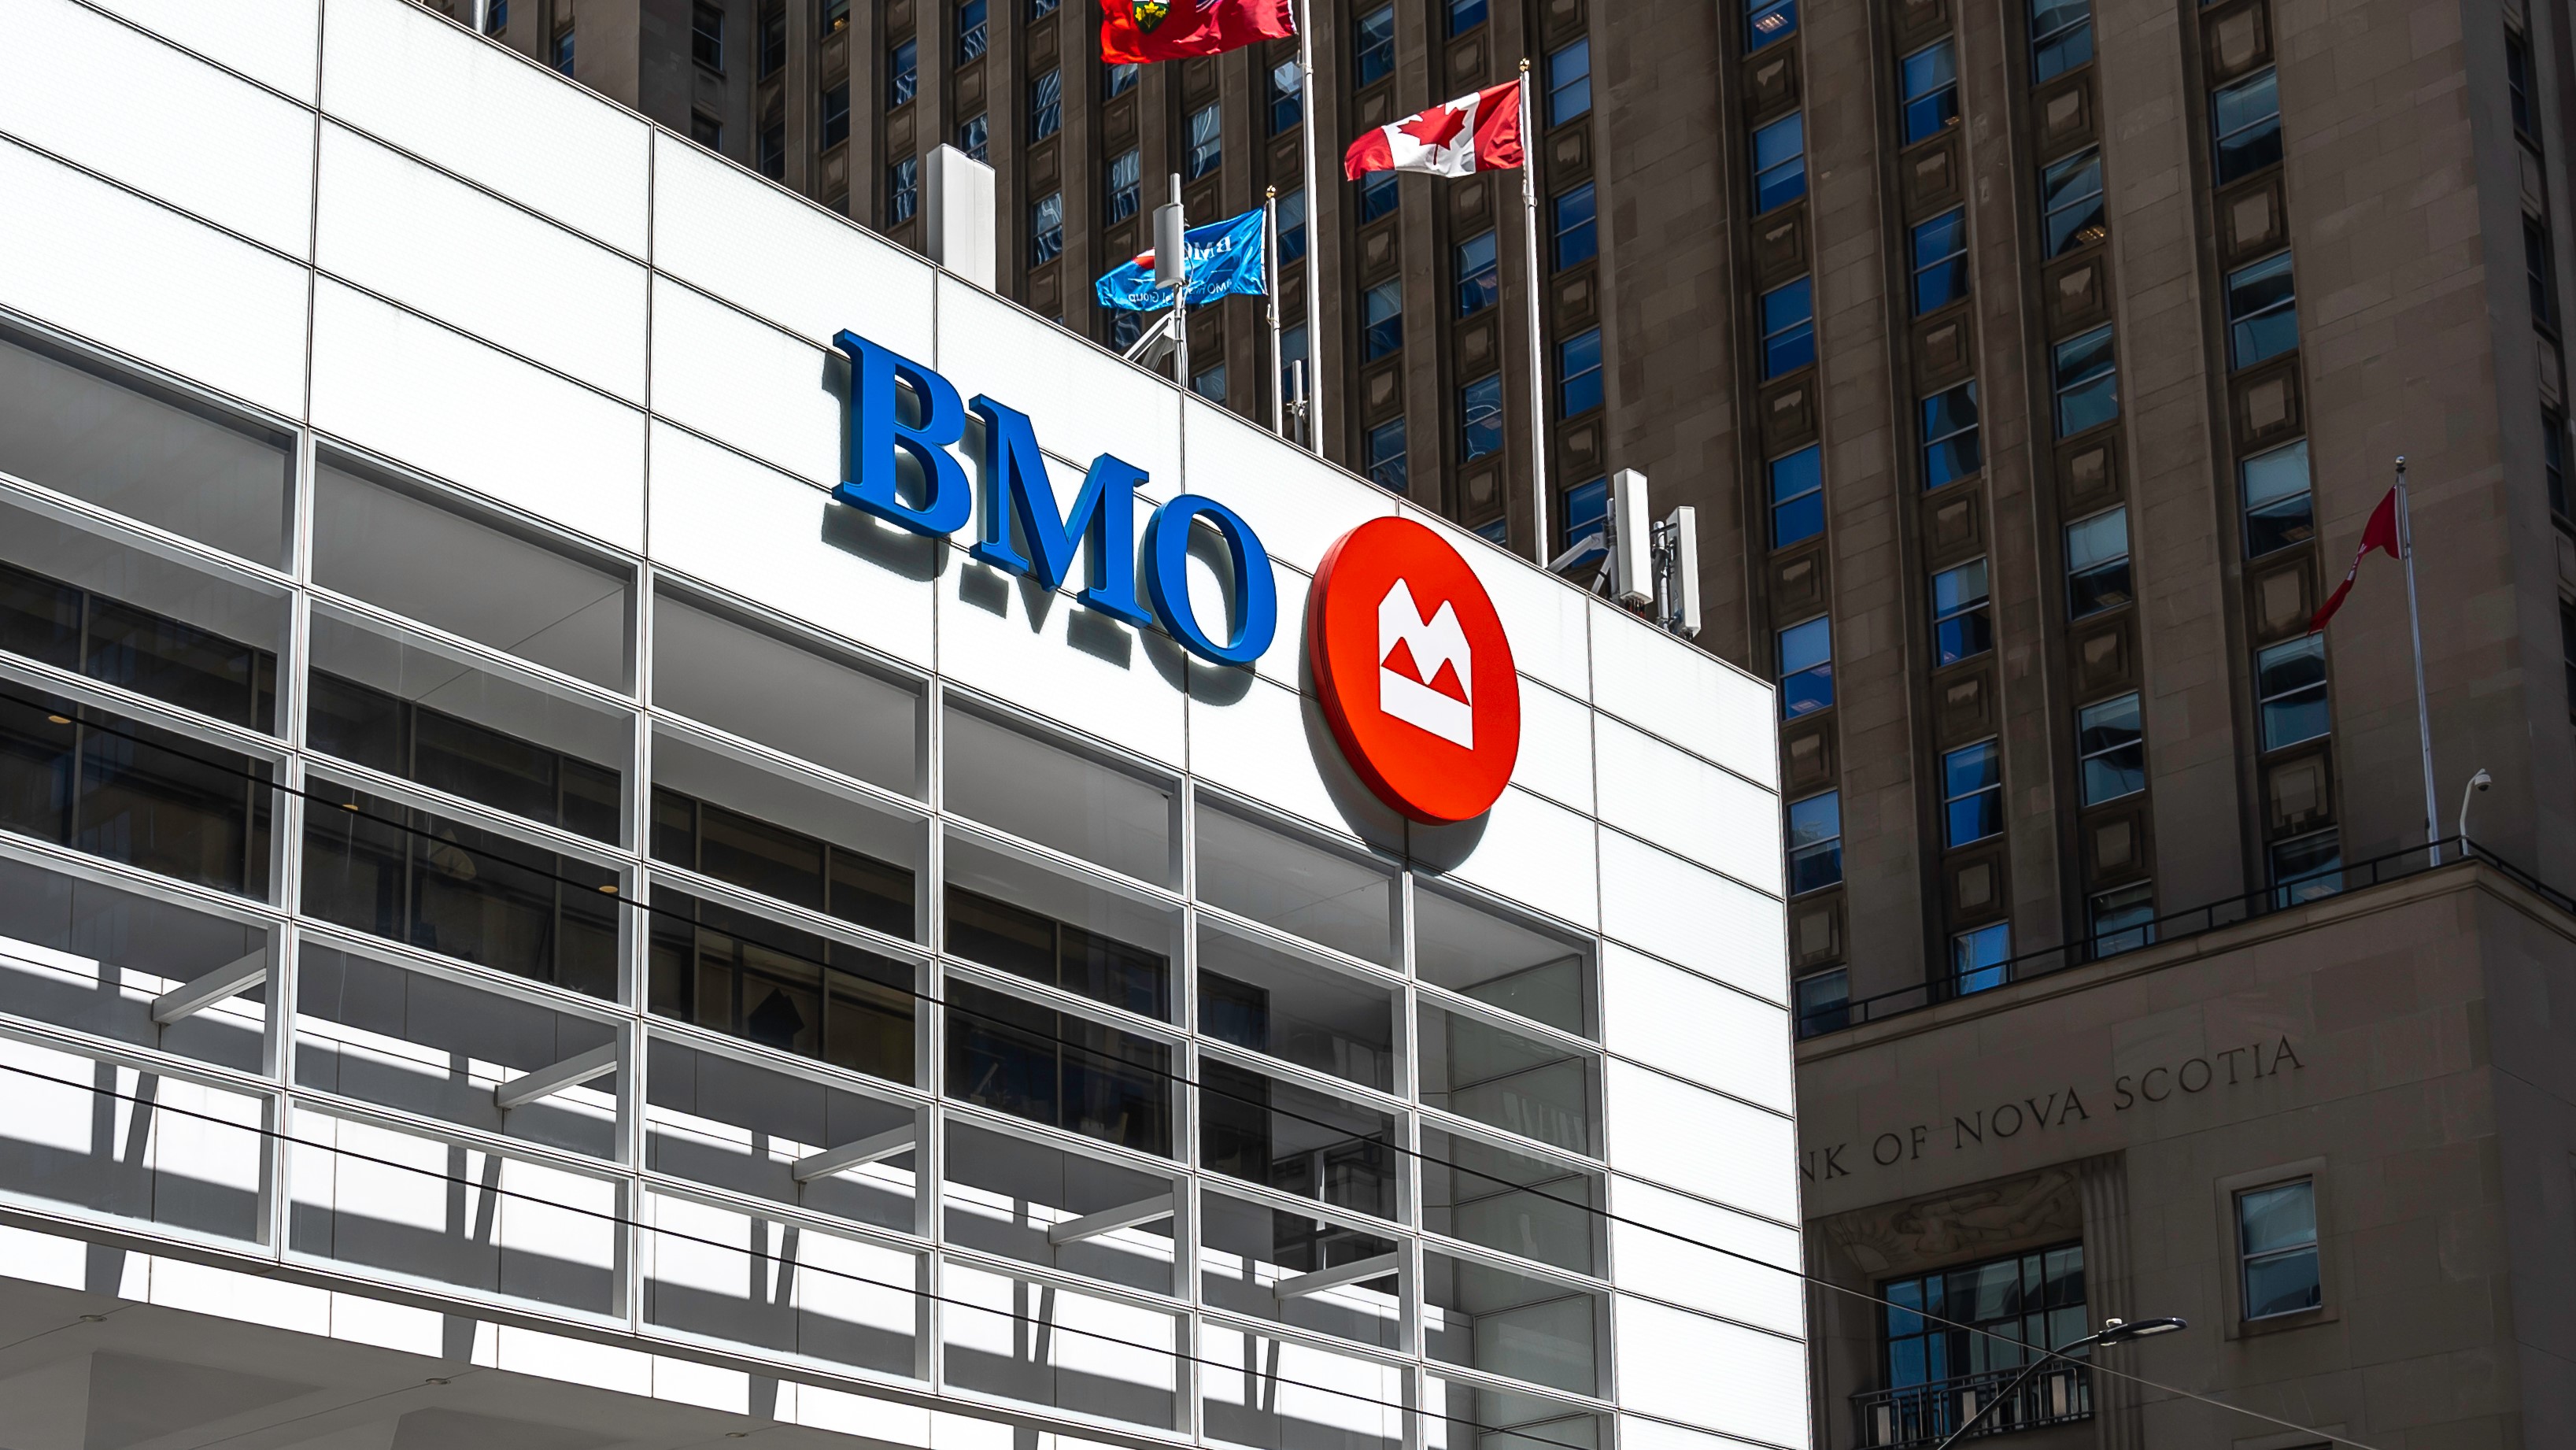 The quarterly earnings of bank BMO break out its transportation sector and those figures are considered an important barometer on the health of the trucking industry.